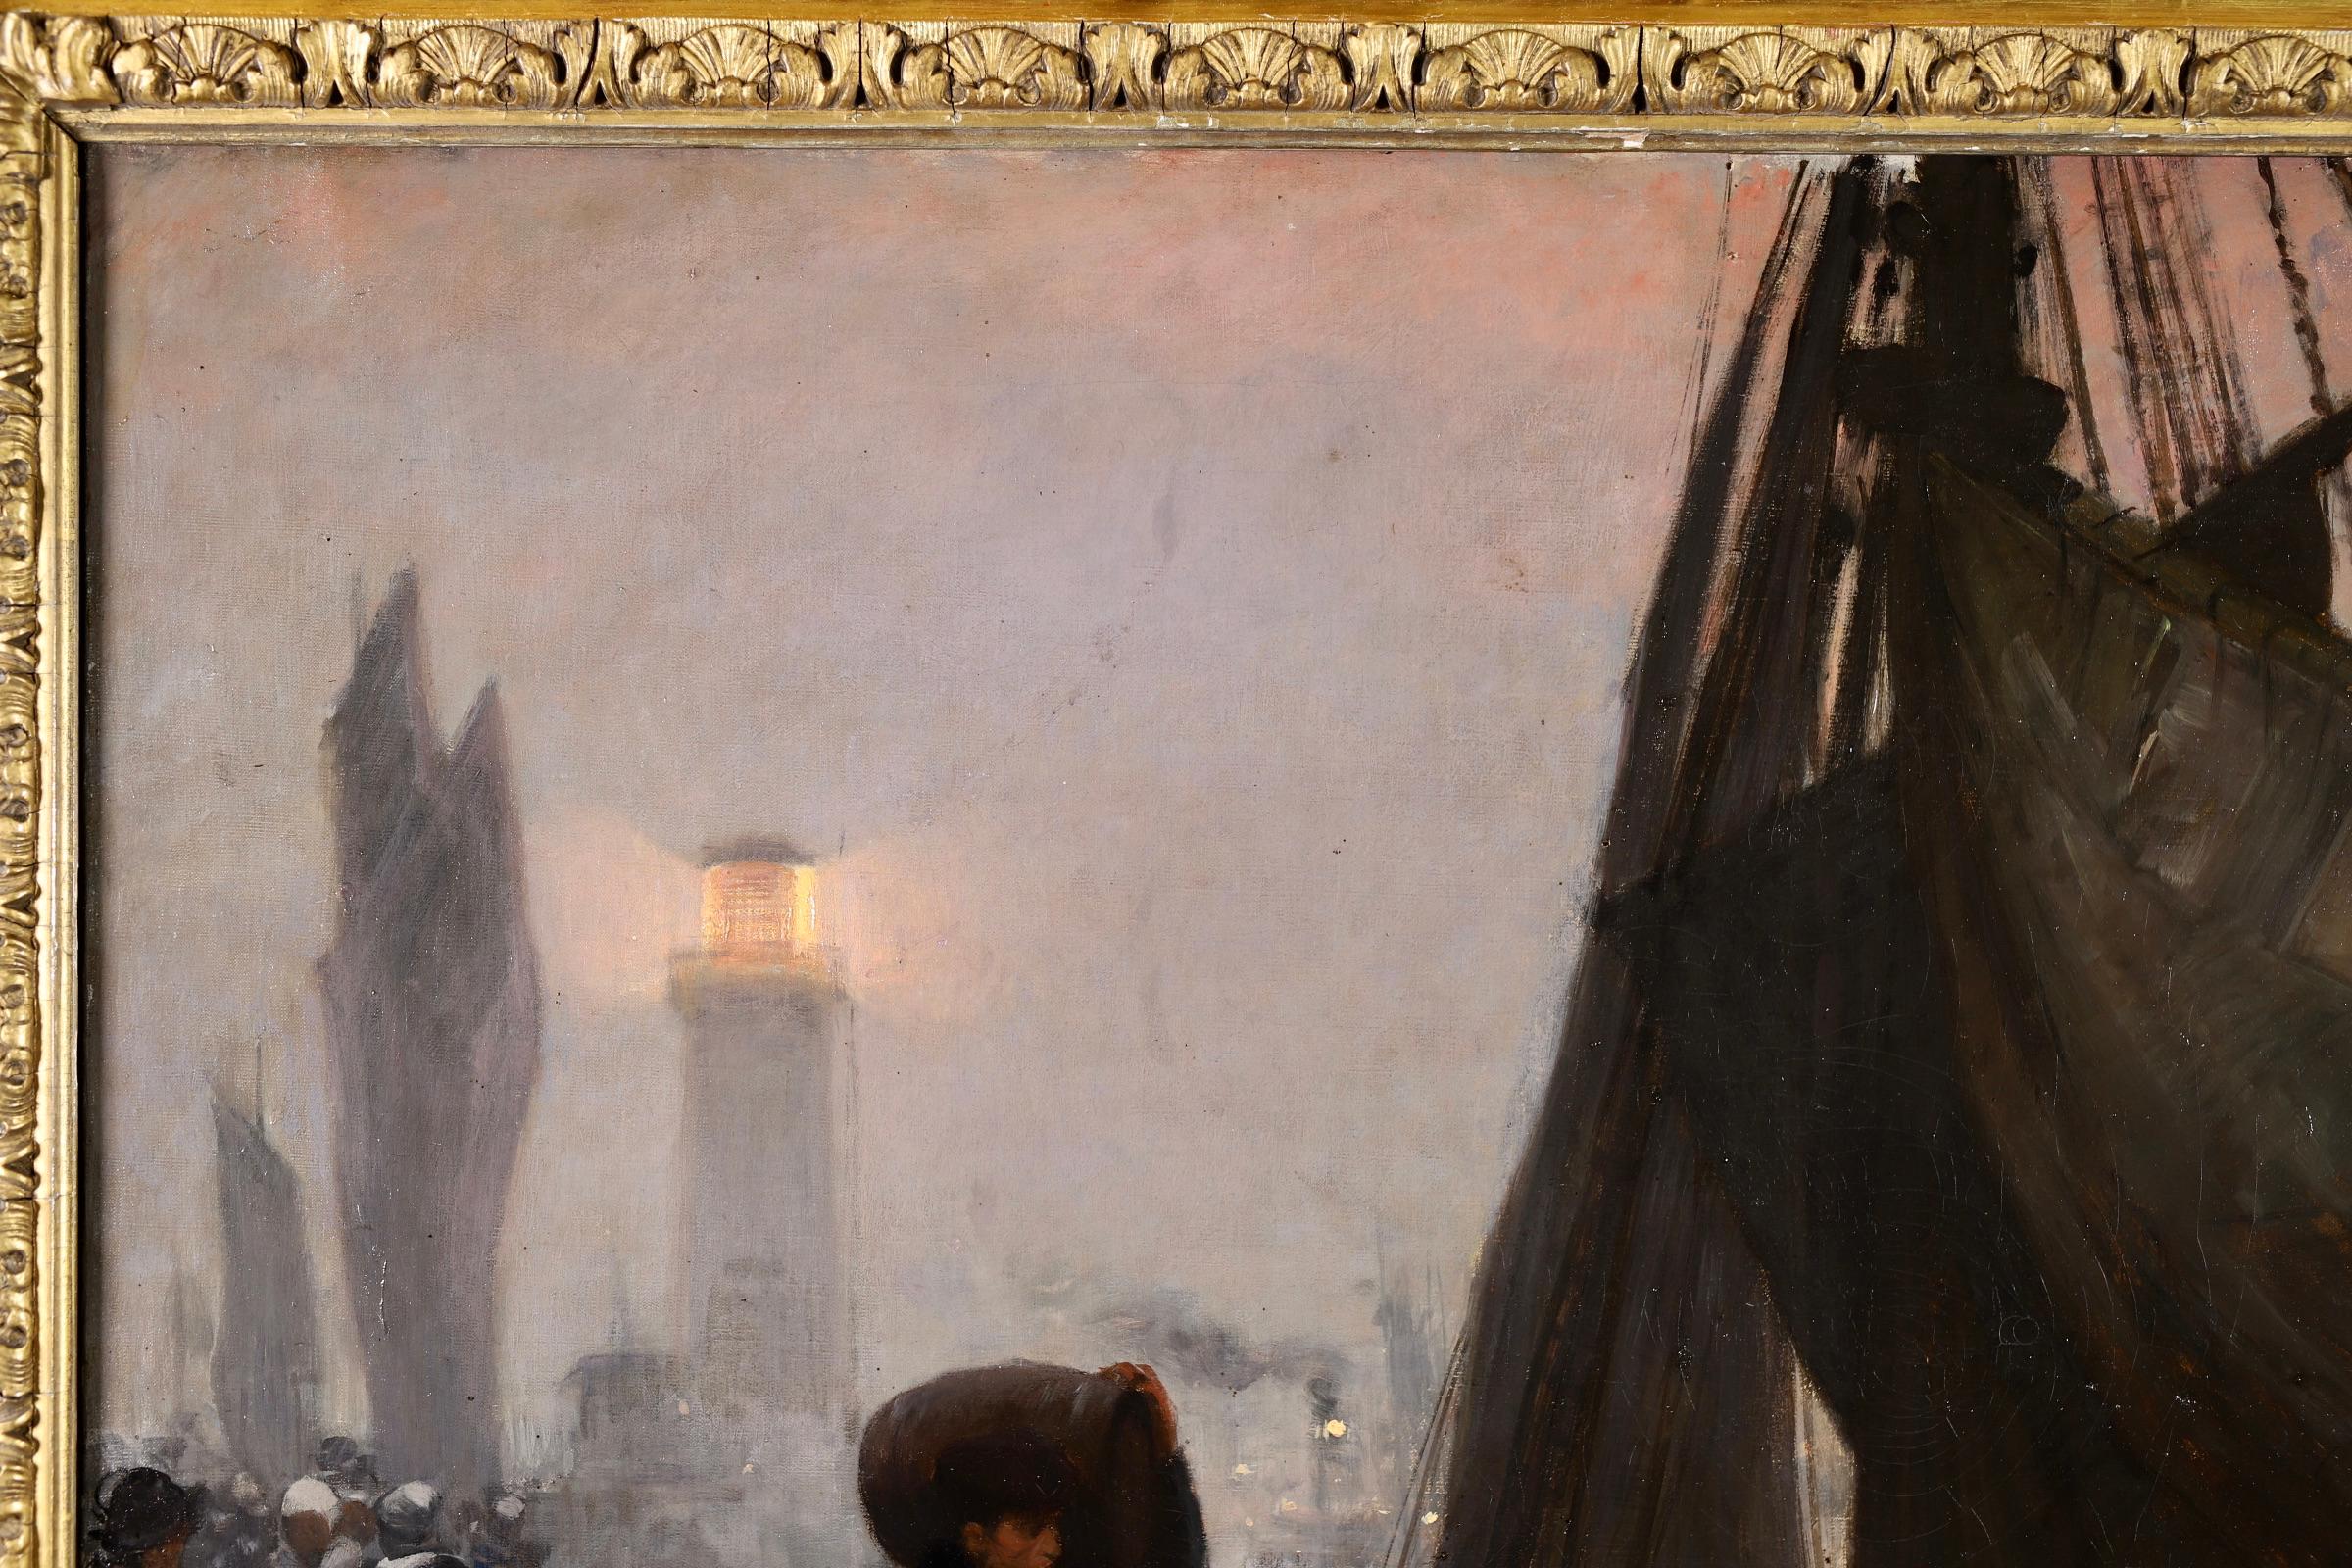 Signed realist figurative oil on original canvas by French painter Victor Gabriel Gilbert. The work depicts workers unloading boats in by the light of the lanterns on a cold, wet evening. The lighthouse can be seen illuminated in the distance.